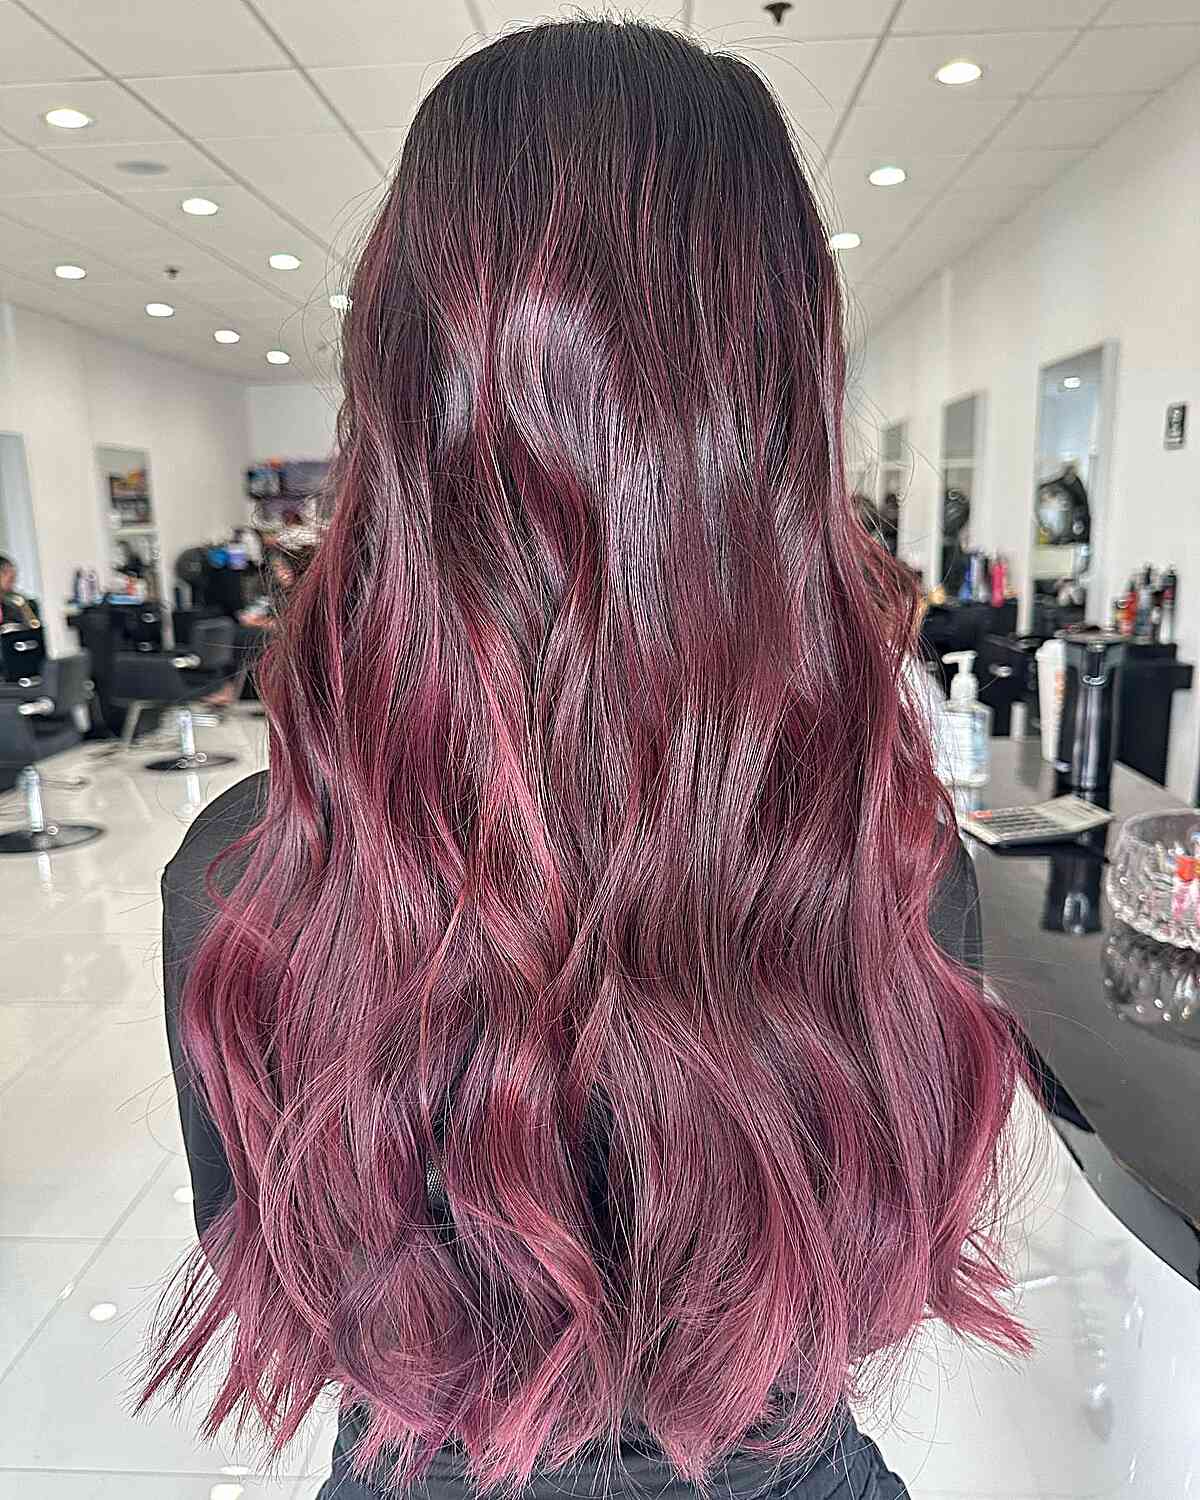 Bright Burgundy Balayage Highlights for Long and Thick Tresses